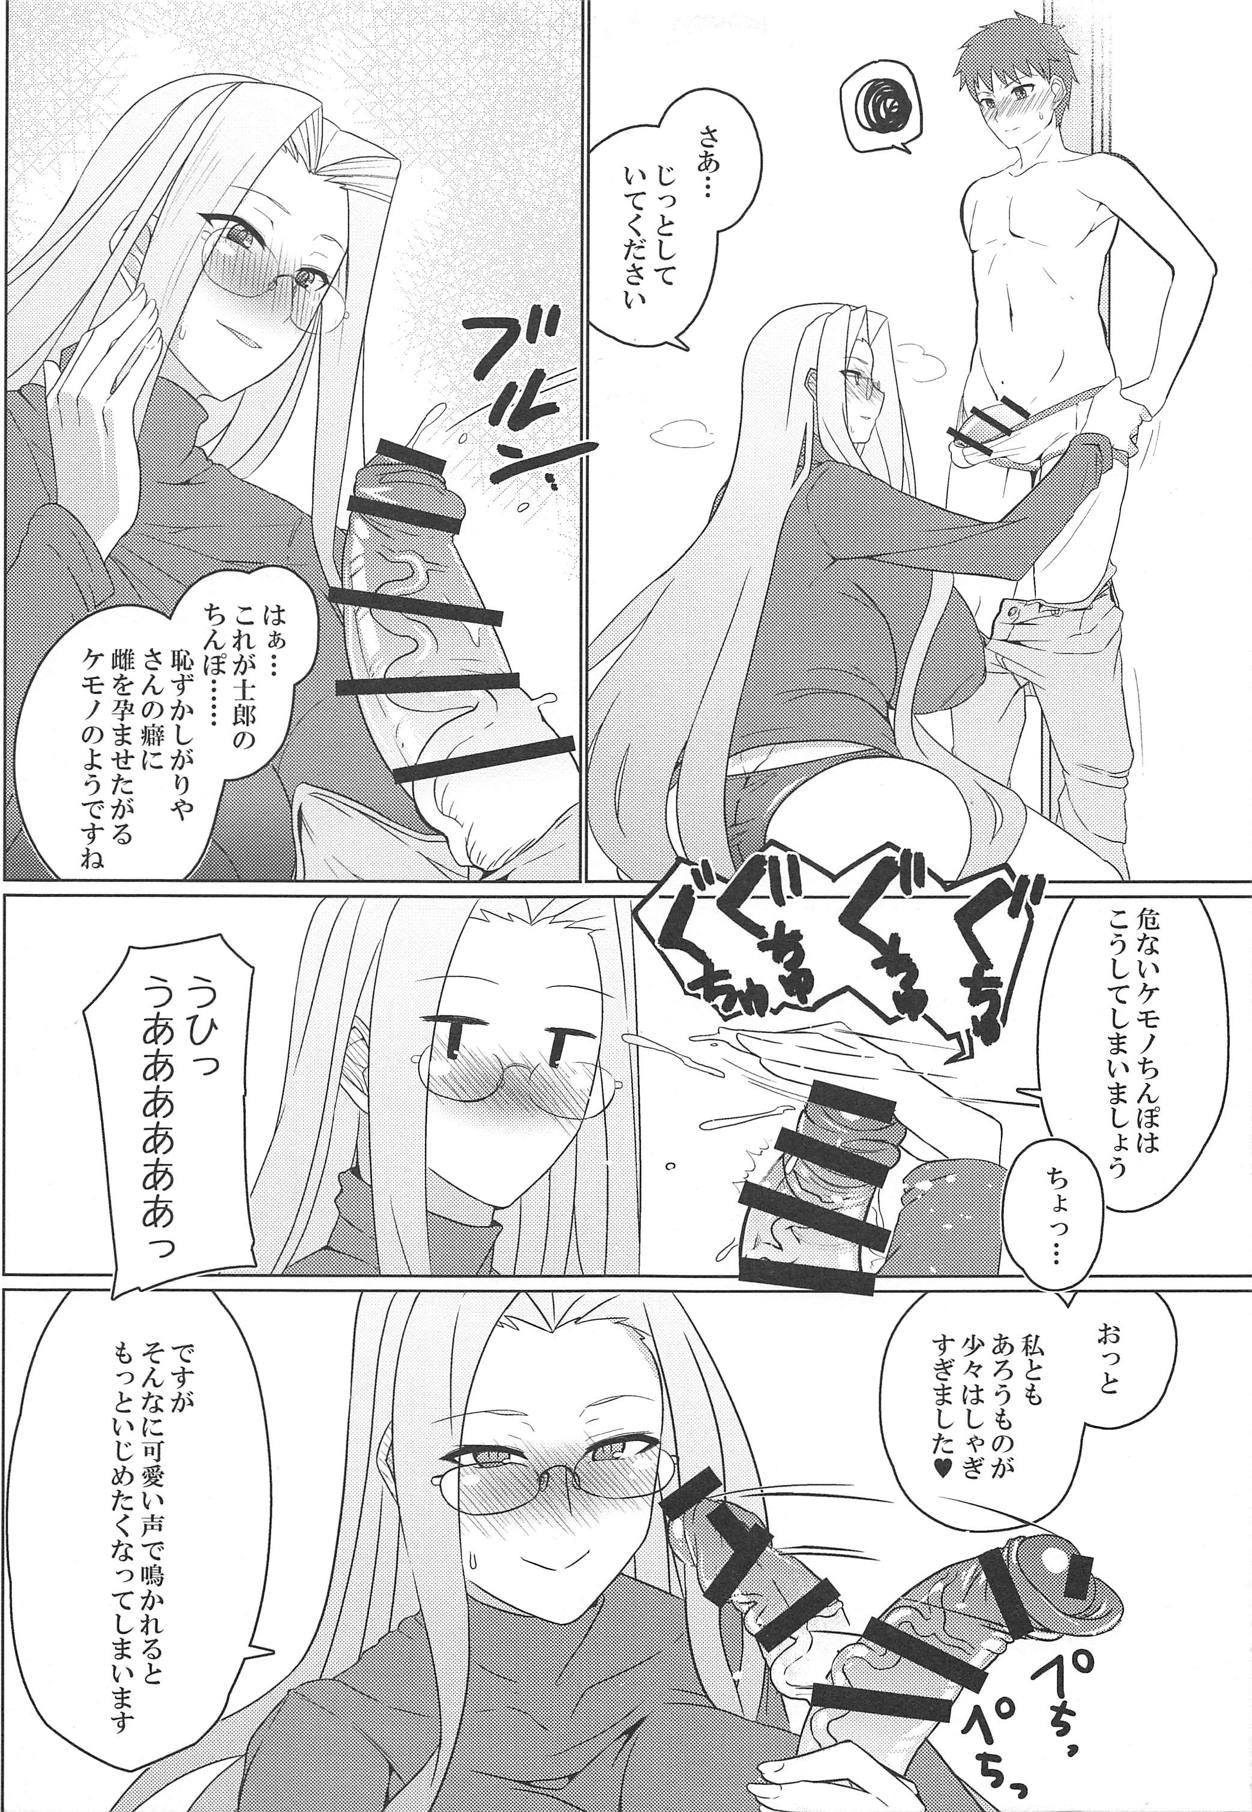 Ballbusting Tsumamigui - Fate stay night Crazy - Page 4